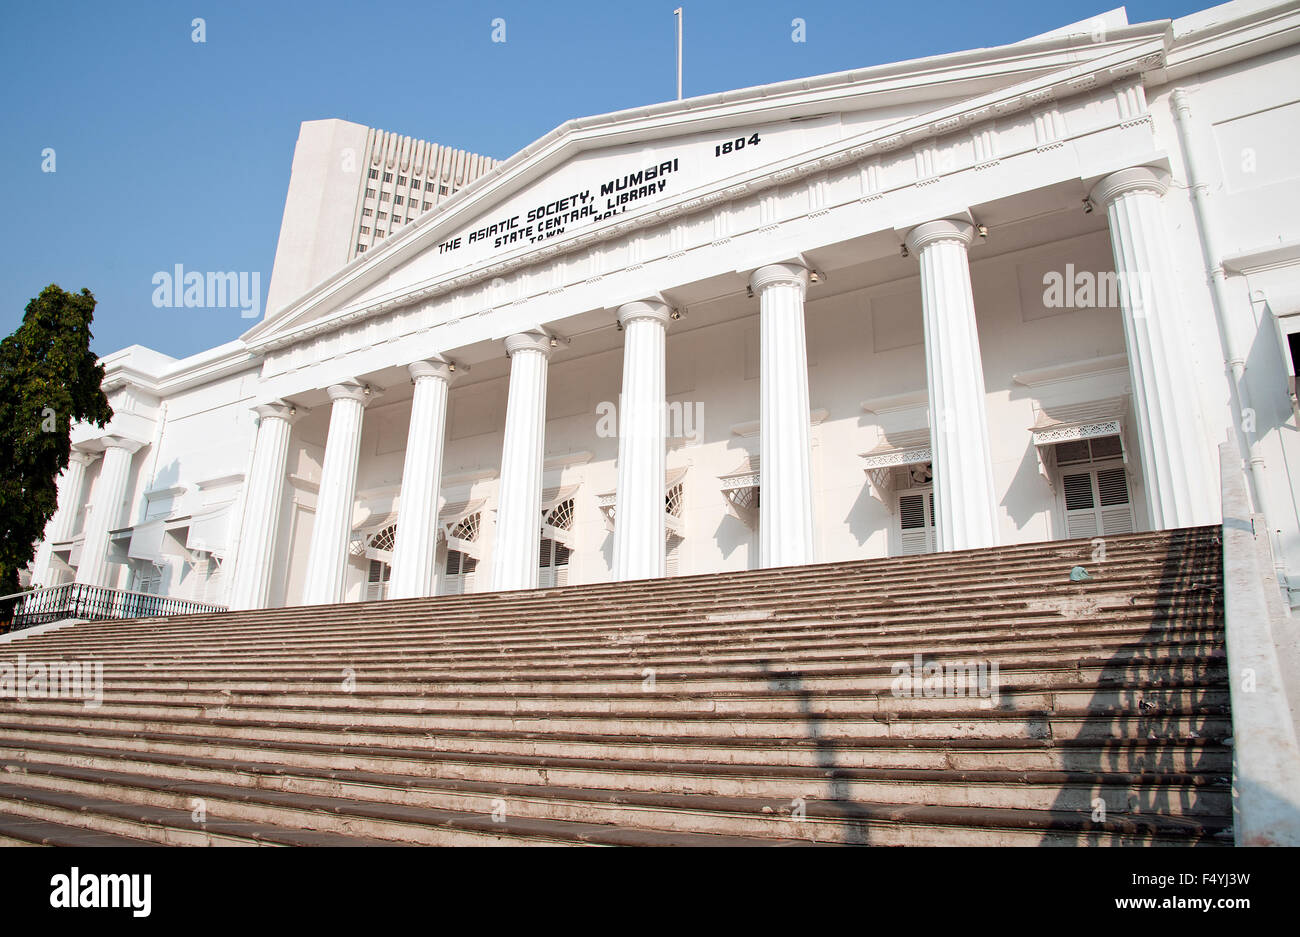 The image of Asiatic Society Library was taken in Mumbai, India Stock Photo